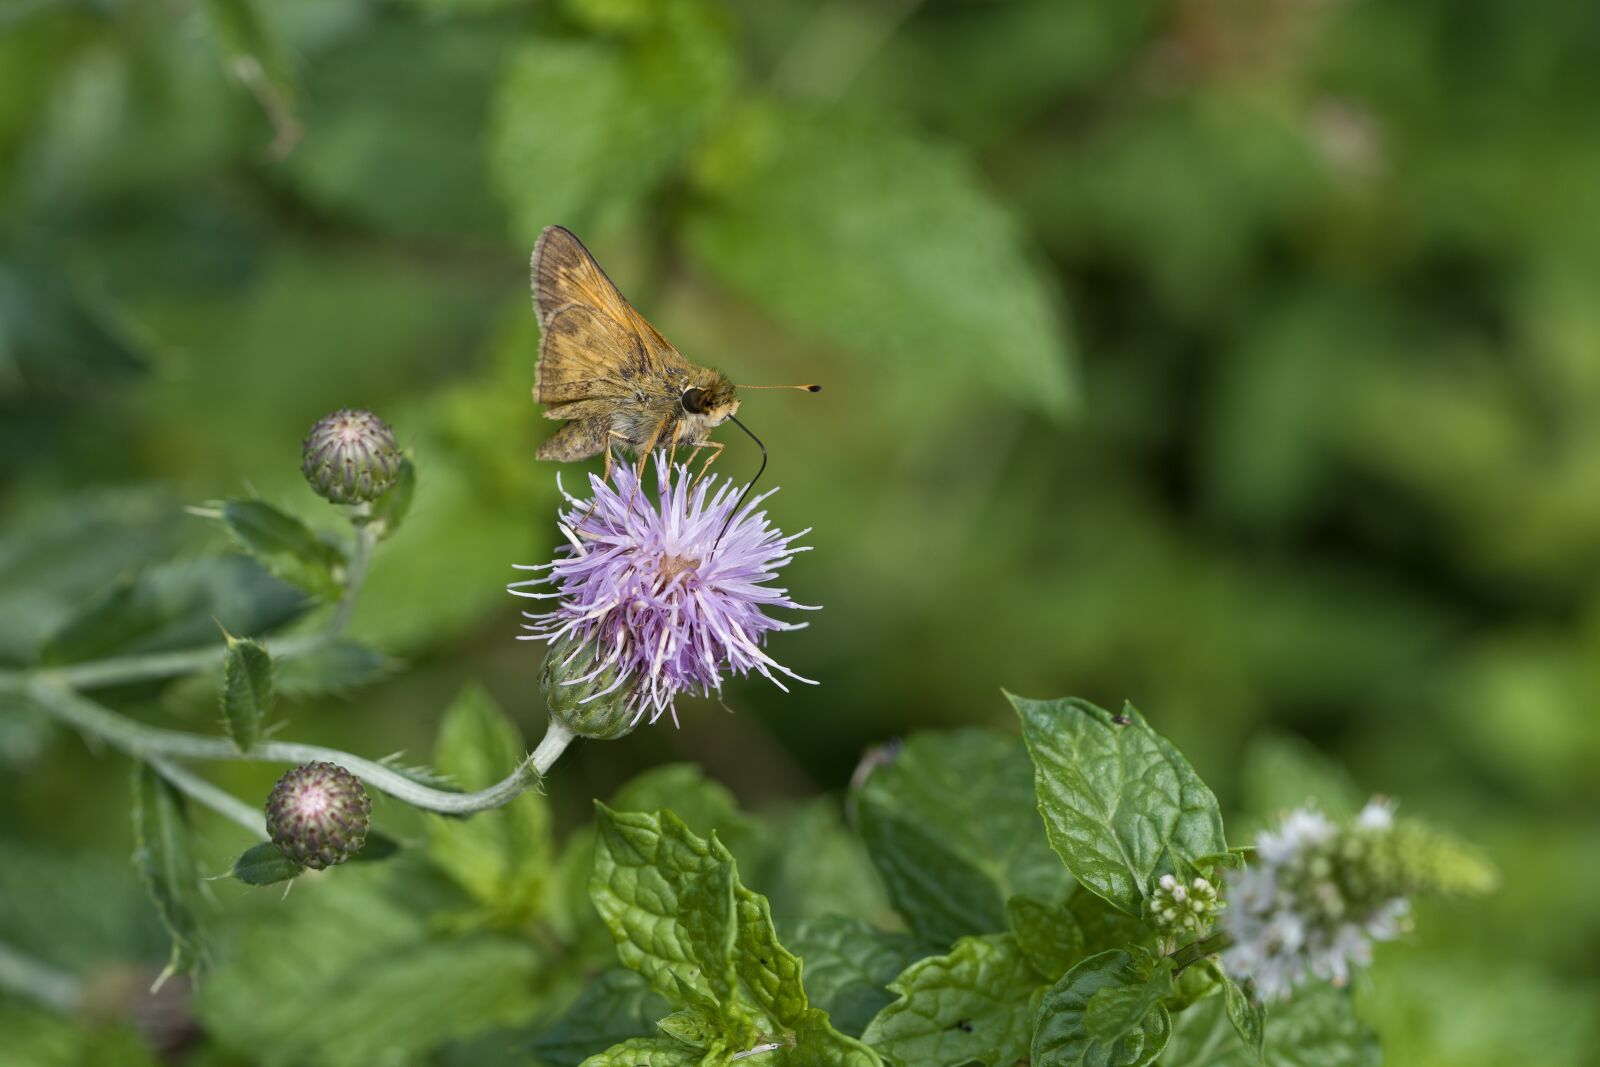 Sony a9 sample photo. Butterfly, thistle, nature photography